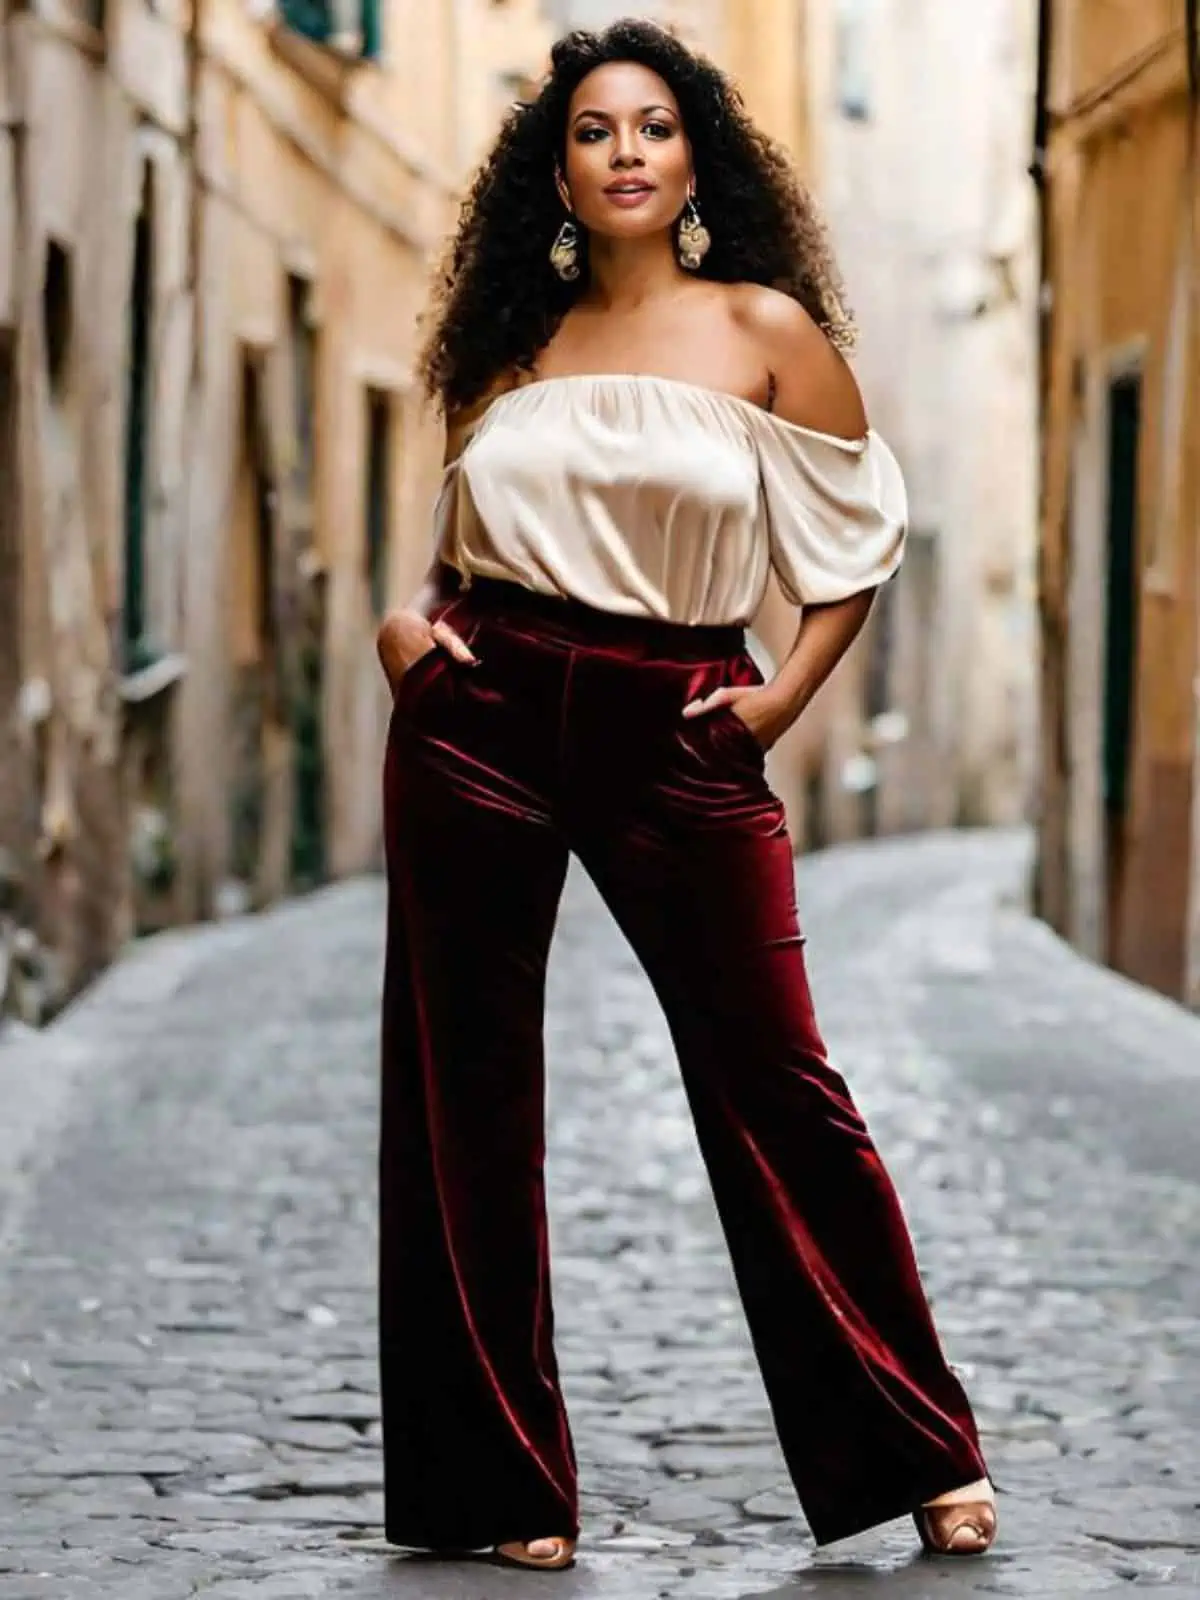 Burgundy Velvet Flare Pants Outfits (2 ideas & outfits)